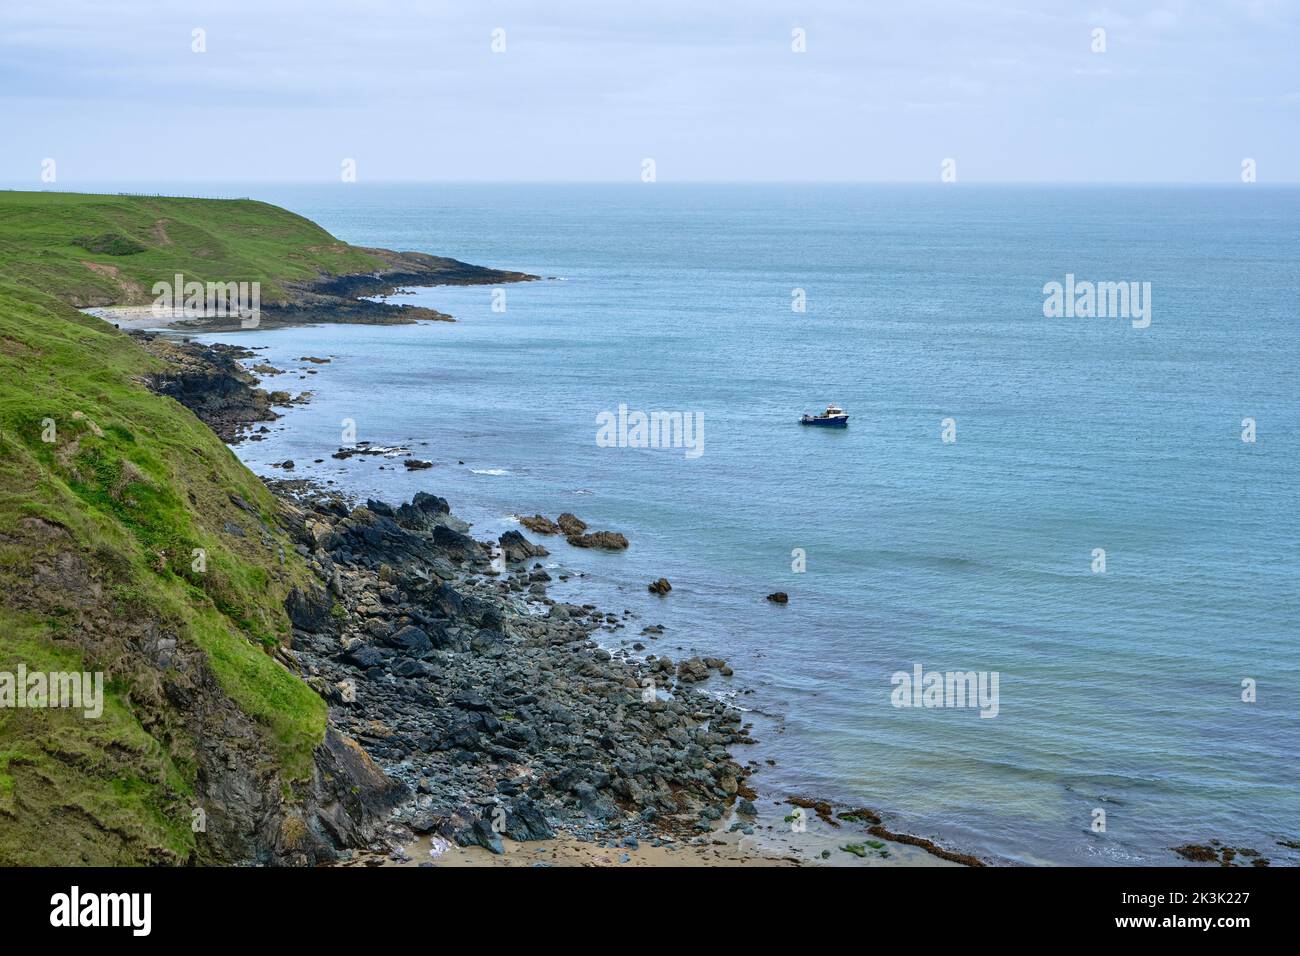 A fishing boat in a bay along the coast of the Llyn Peninsular from the Wales Coast Path Stock Photo